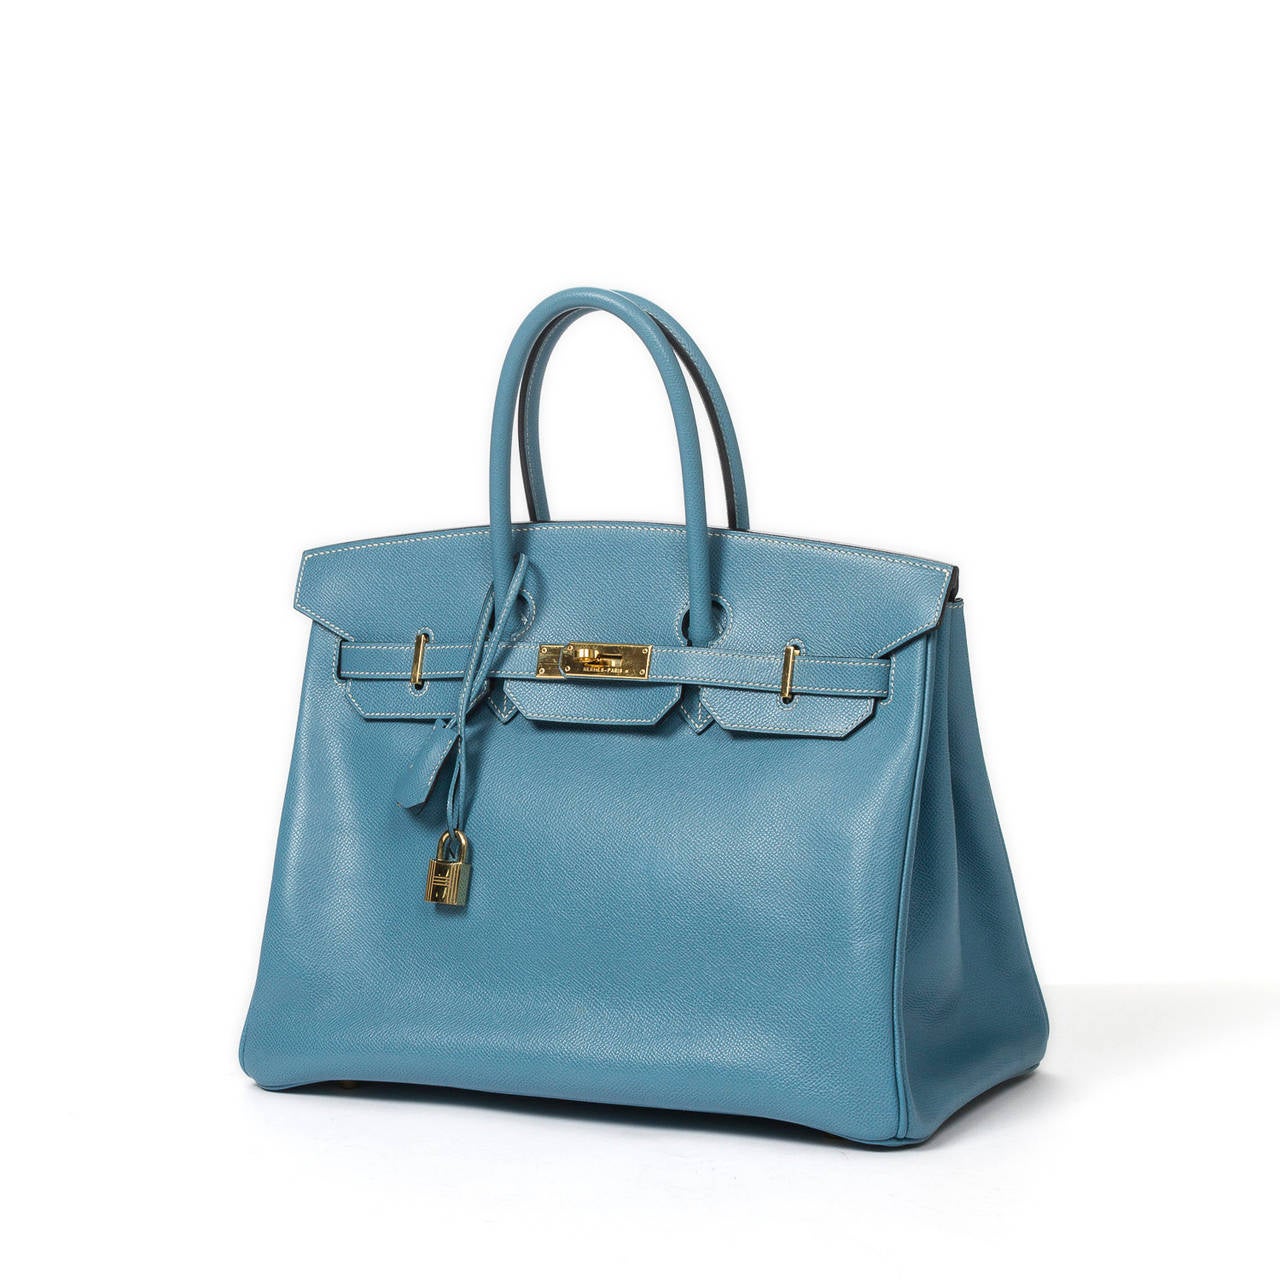 Birkin 35 in epsom blue jean with cadenas and keys in clochette, gold tone hardware. Stamp F in square (2002). Dustbag included. Very slight scuffs on the hardware, perfect condition.